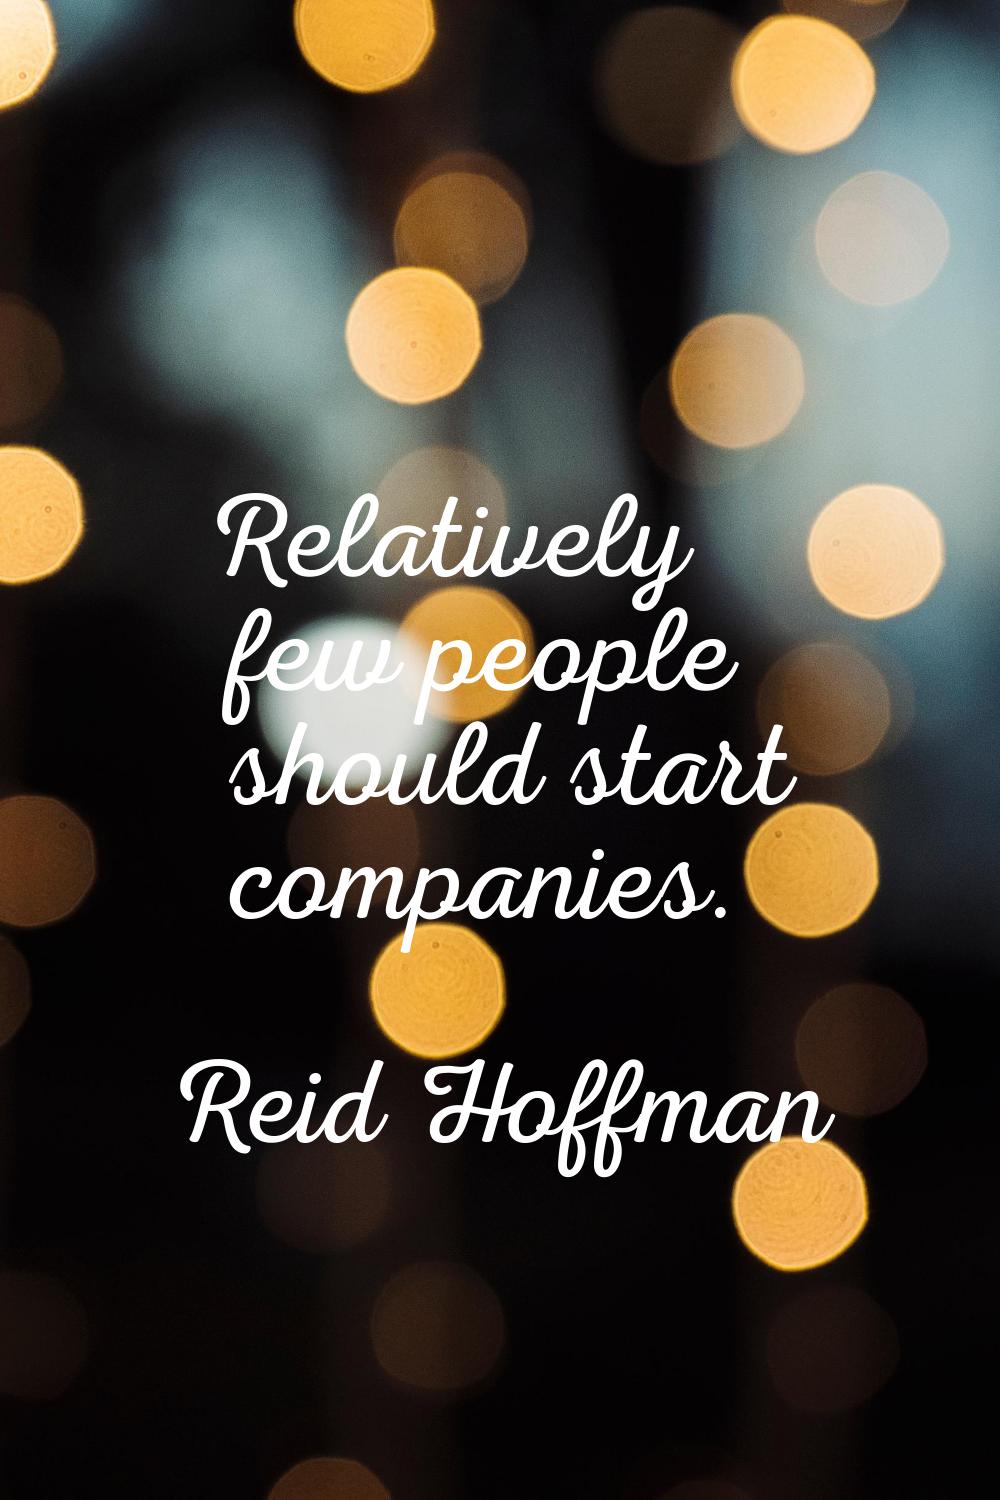 Relatively few people should start companies.